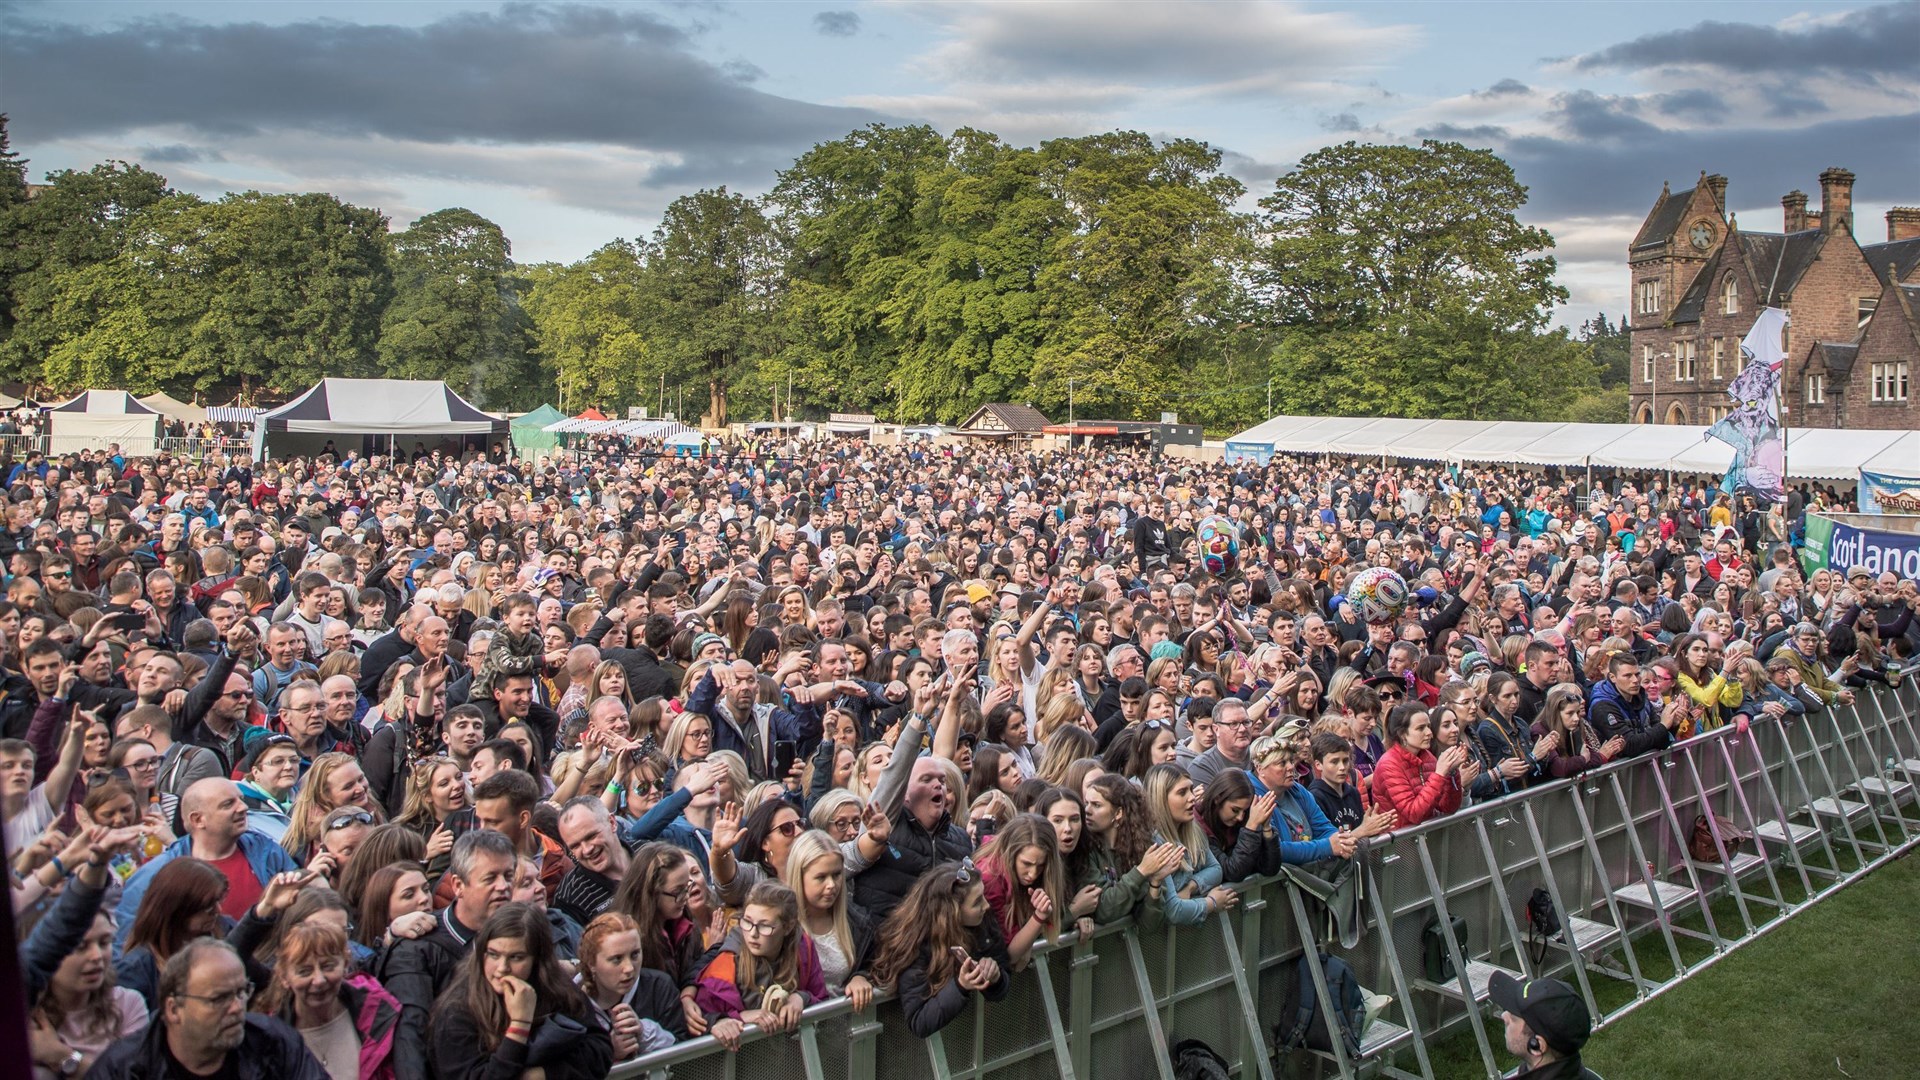 The Gathering in Inverness in 2019.